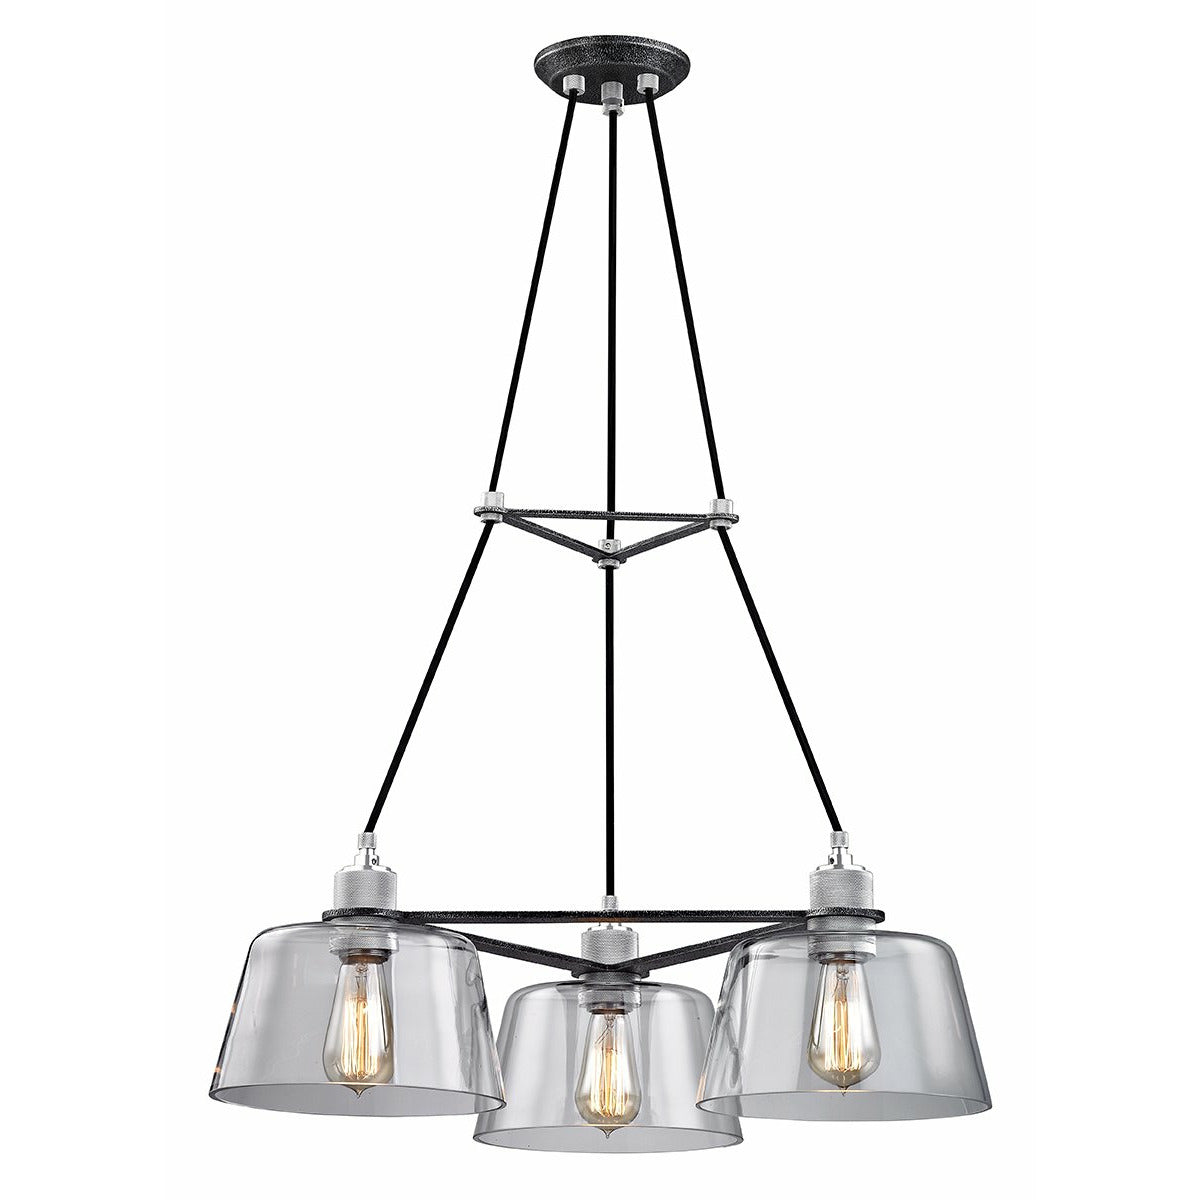 Audiophile Chandelier Old Silver And Polished Alumin